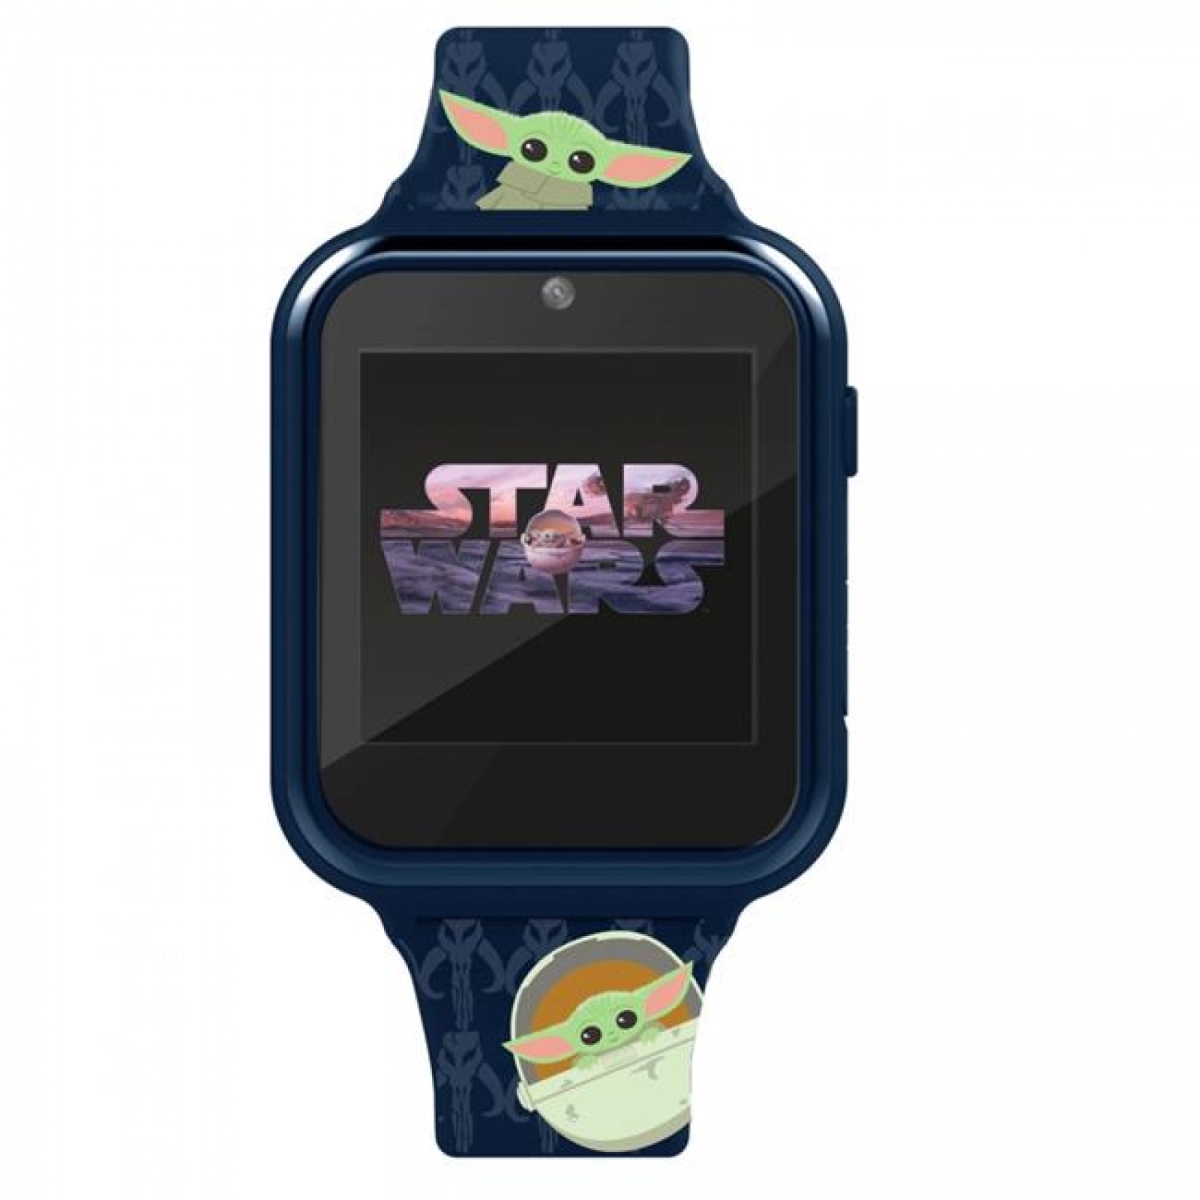 Star Wars 818360 Accutime the Child from the Mandalorian All Over Print Interactive Kids Watch, Blue